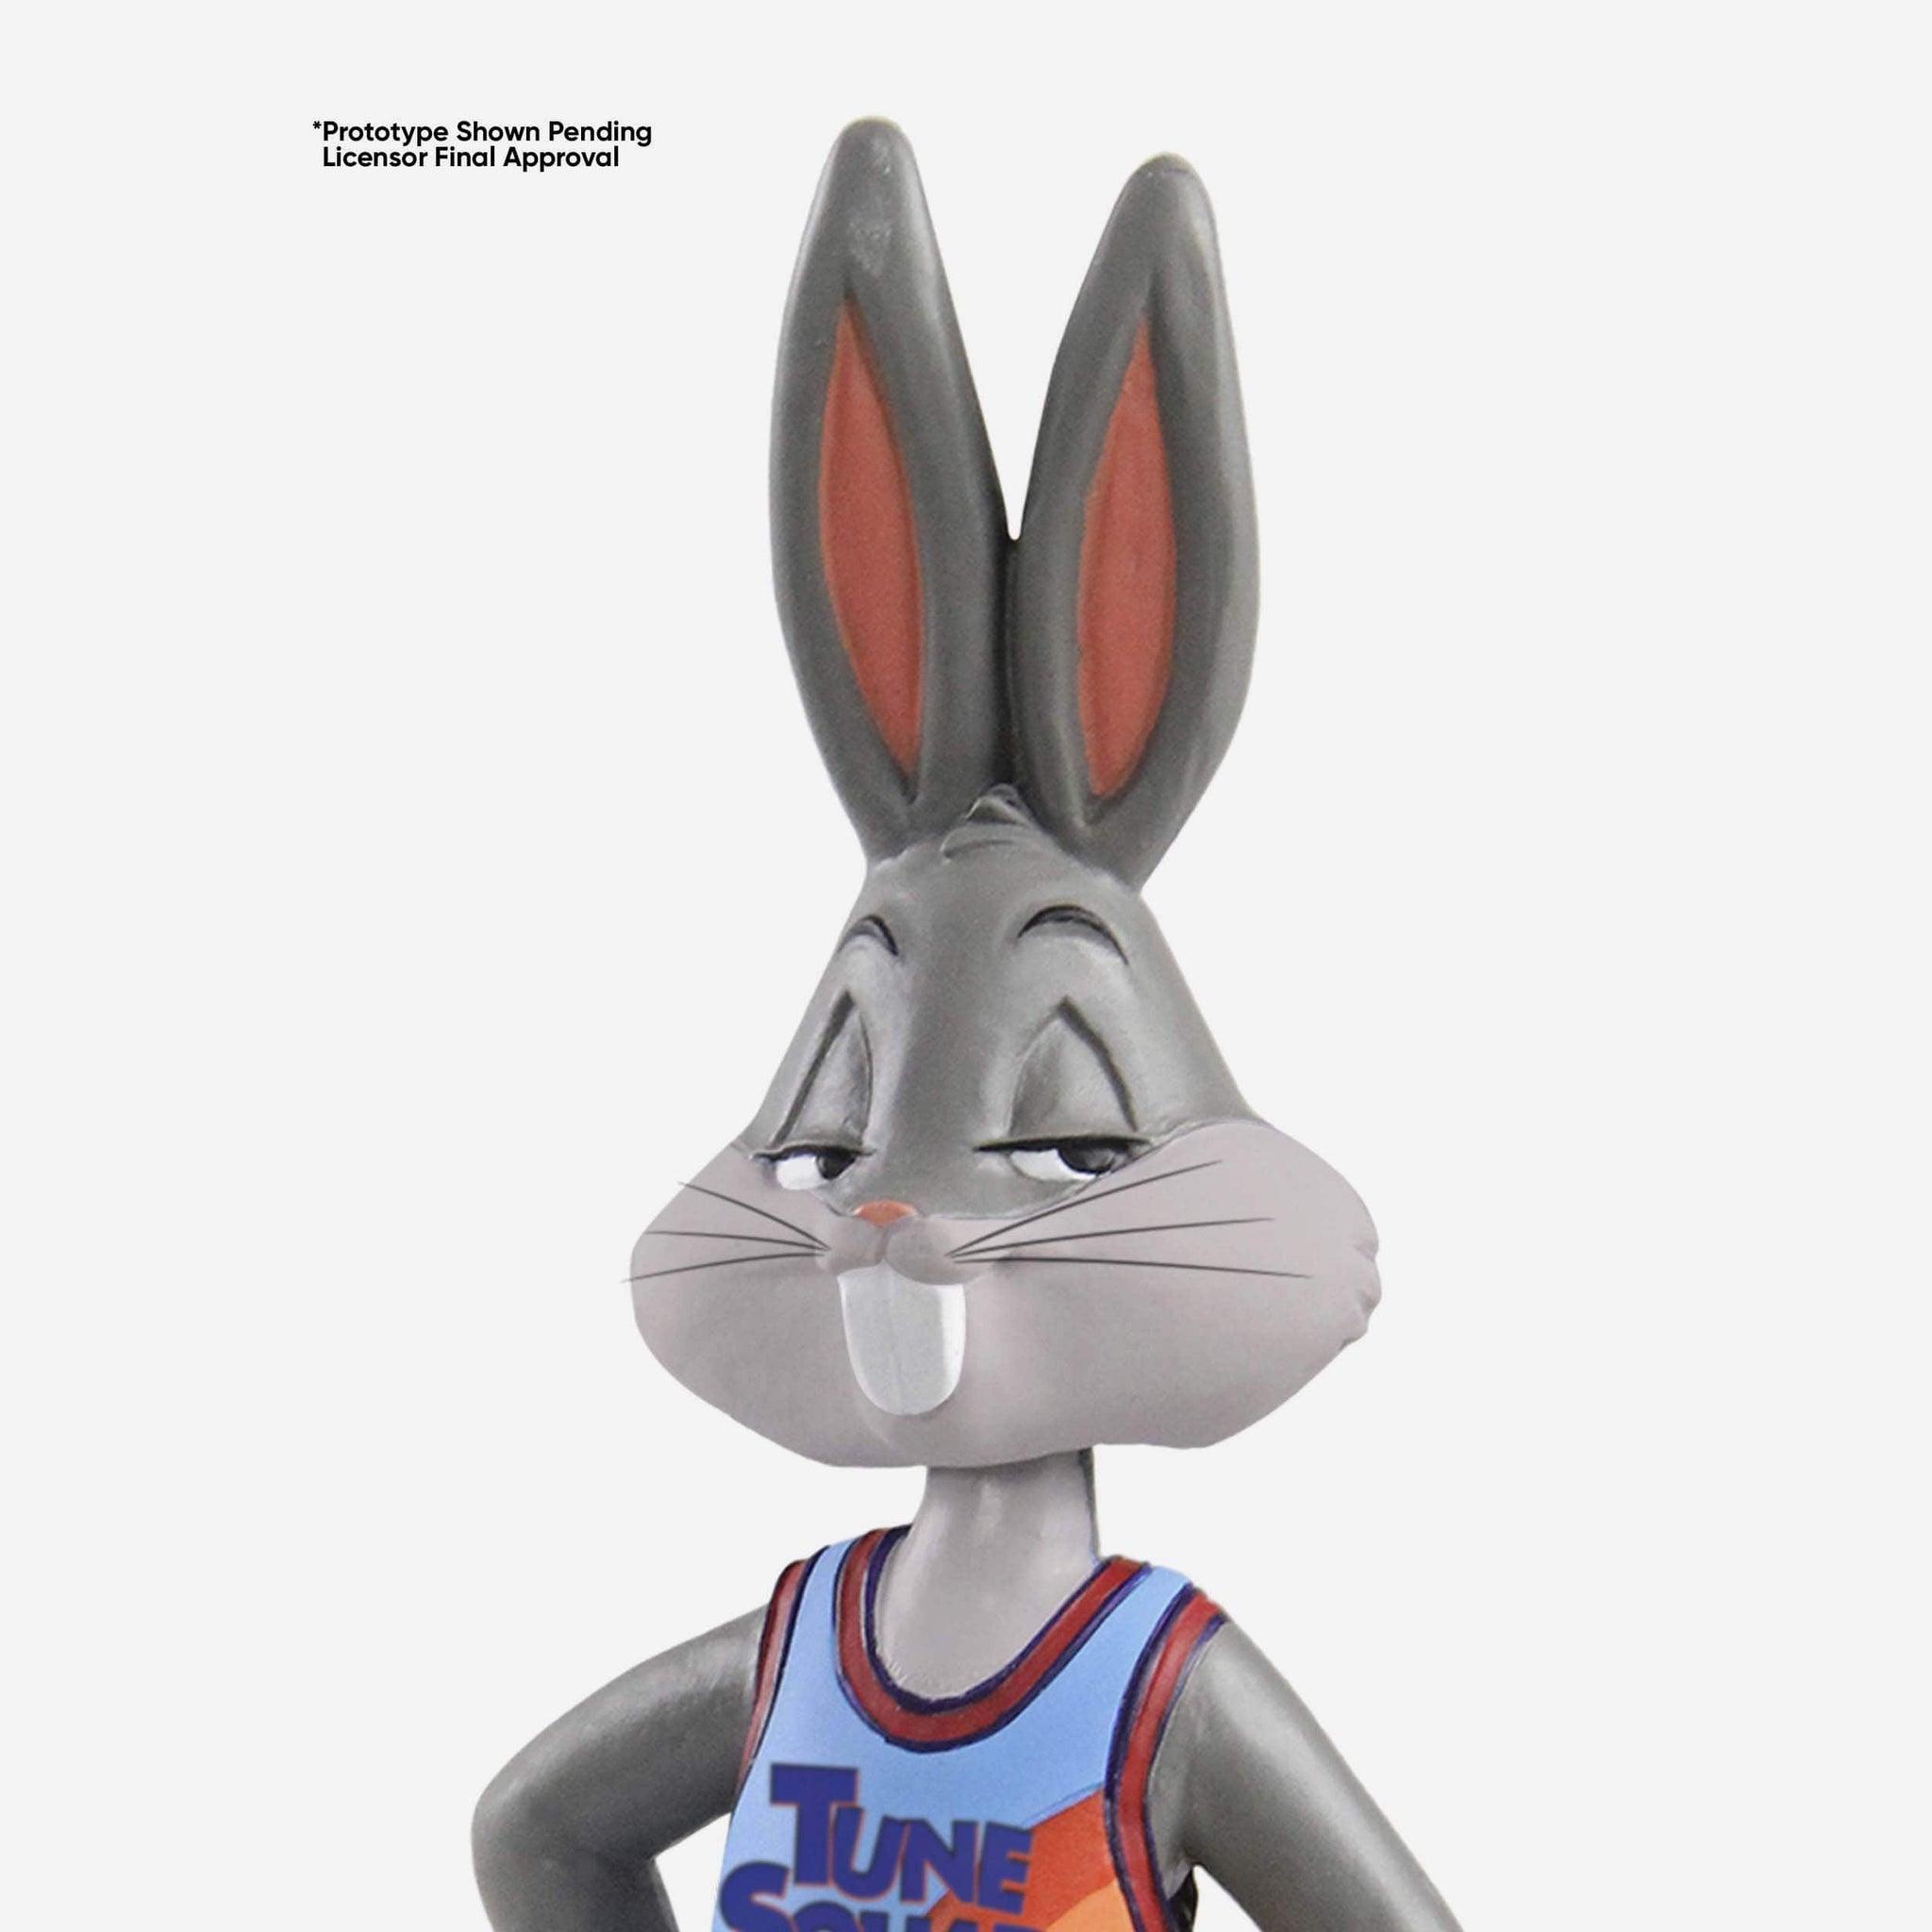 Space Jam 2: Every Confirmed Member Of Bugs Bunny's Team